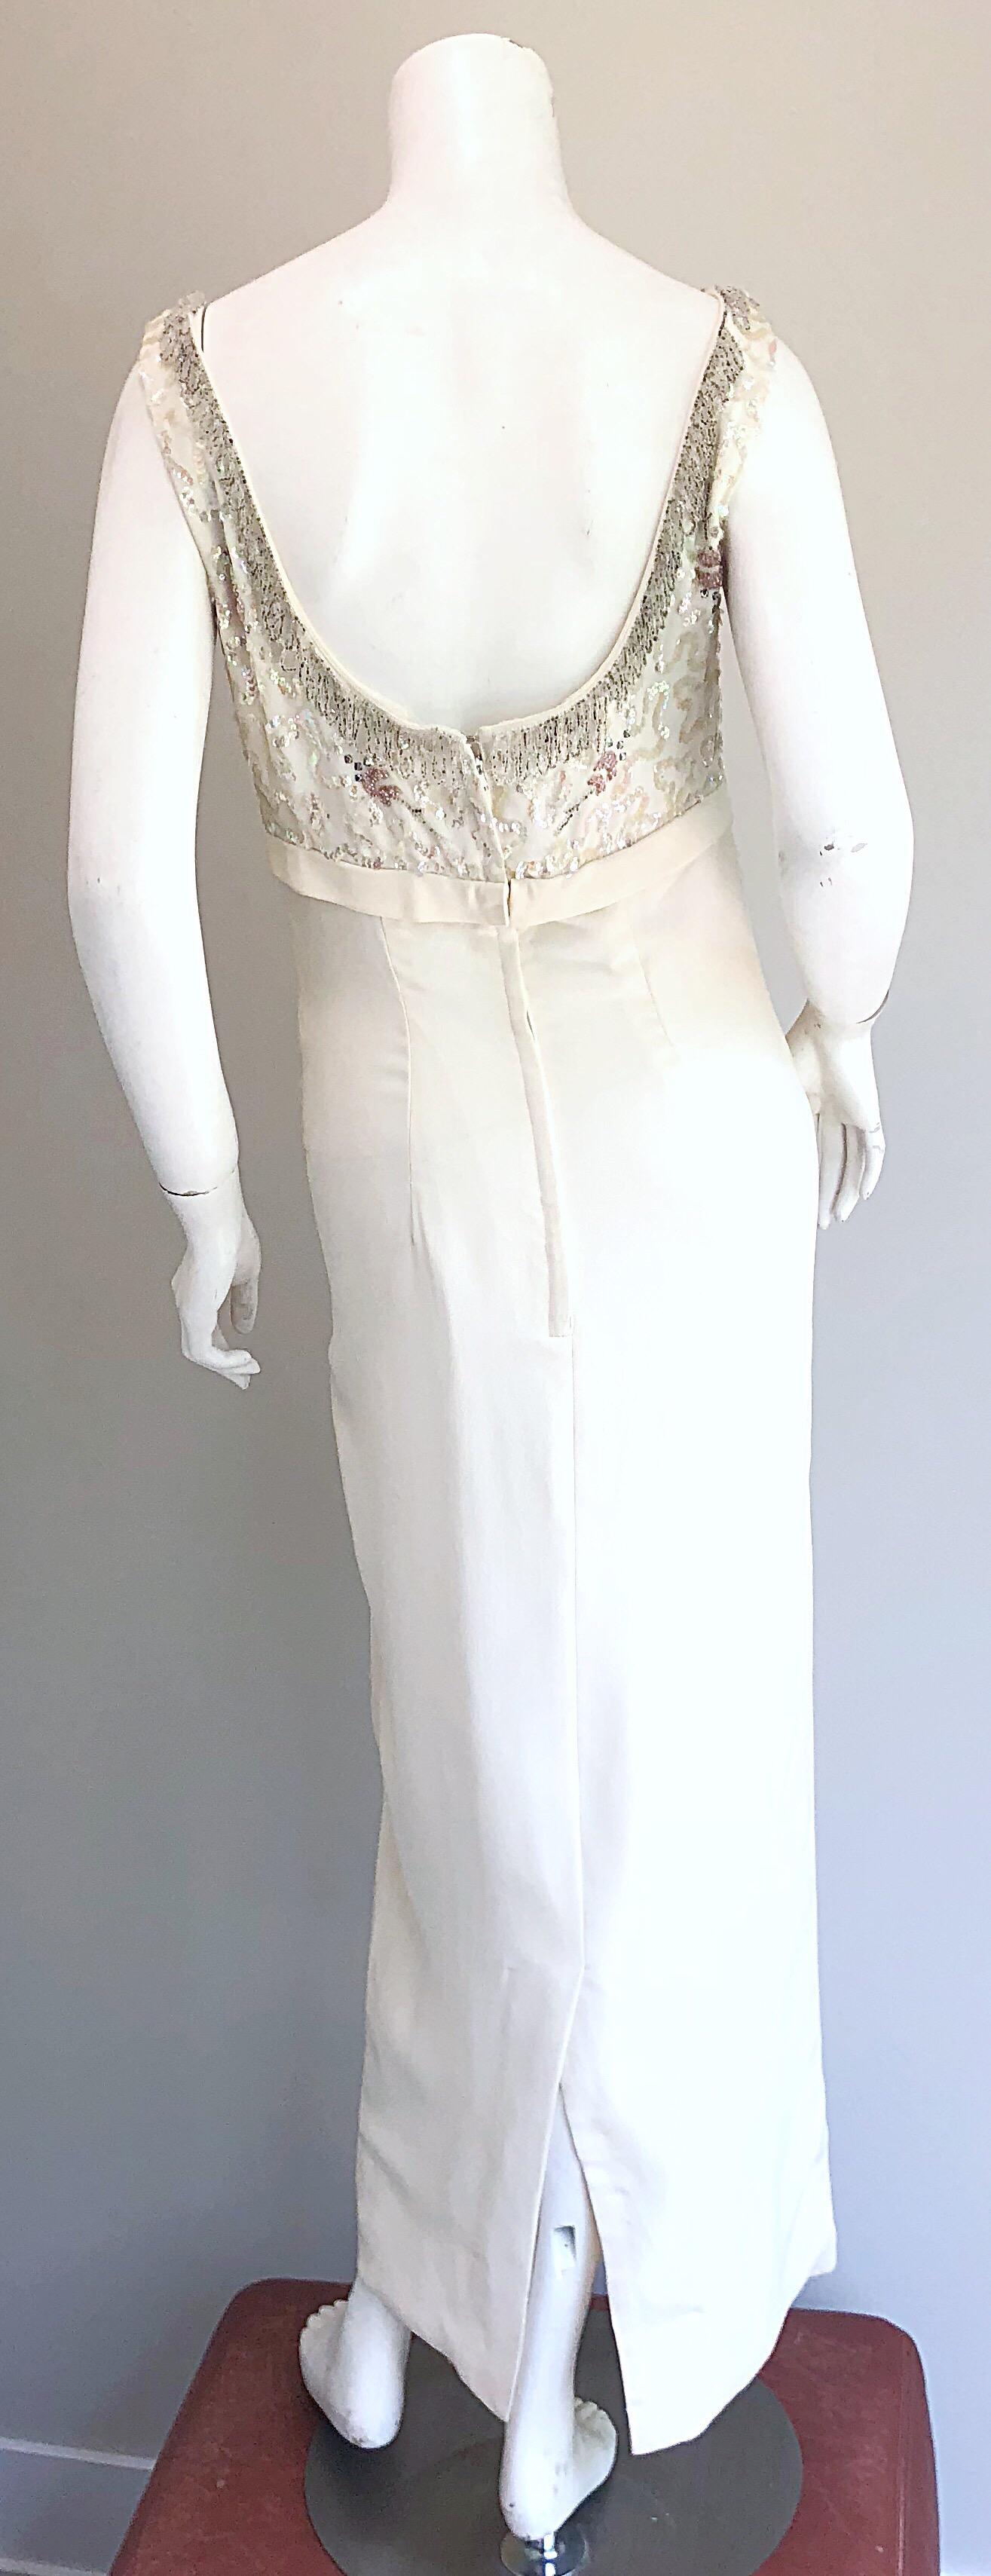 Gray Gorgeous 1960s White Sequin Beaded Vintage Crepe 60s Evening Gown Dress